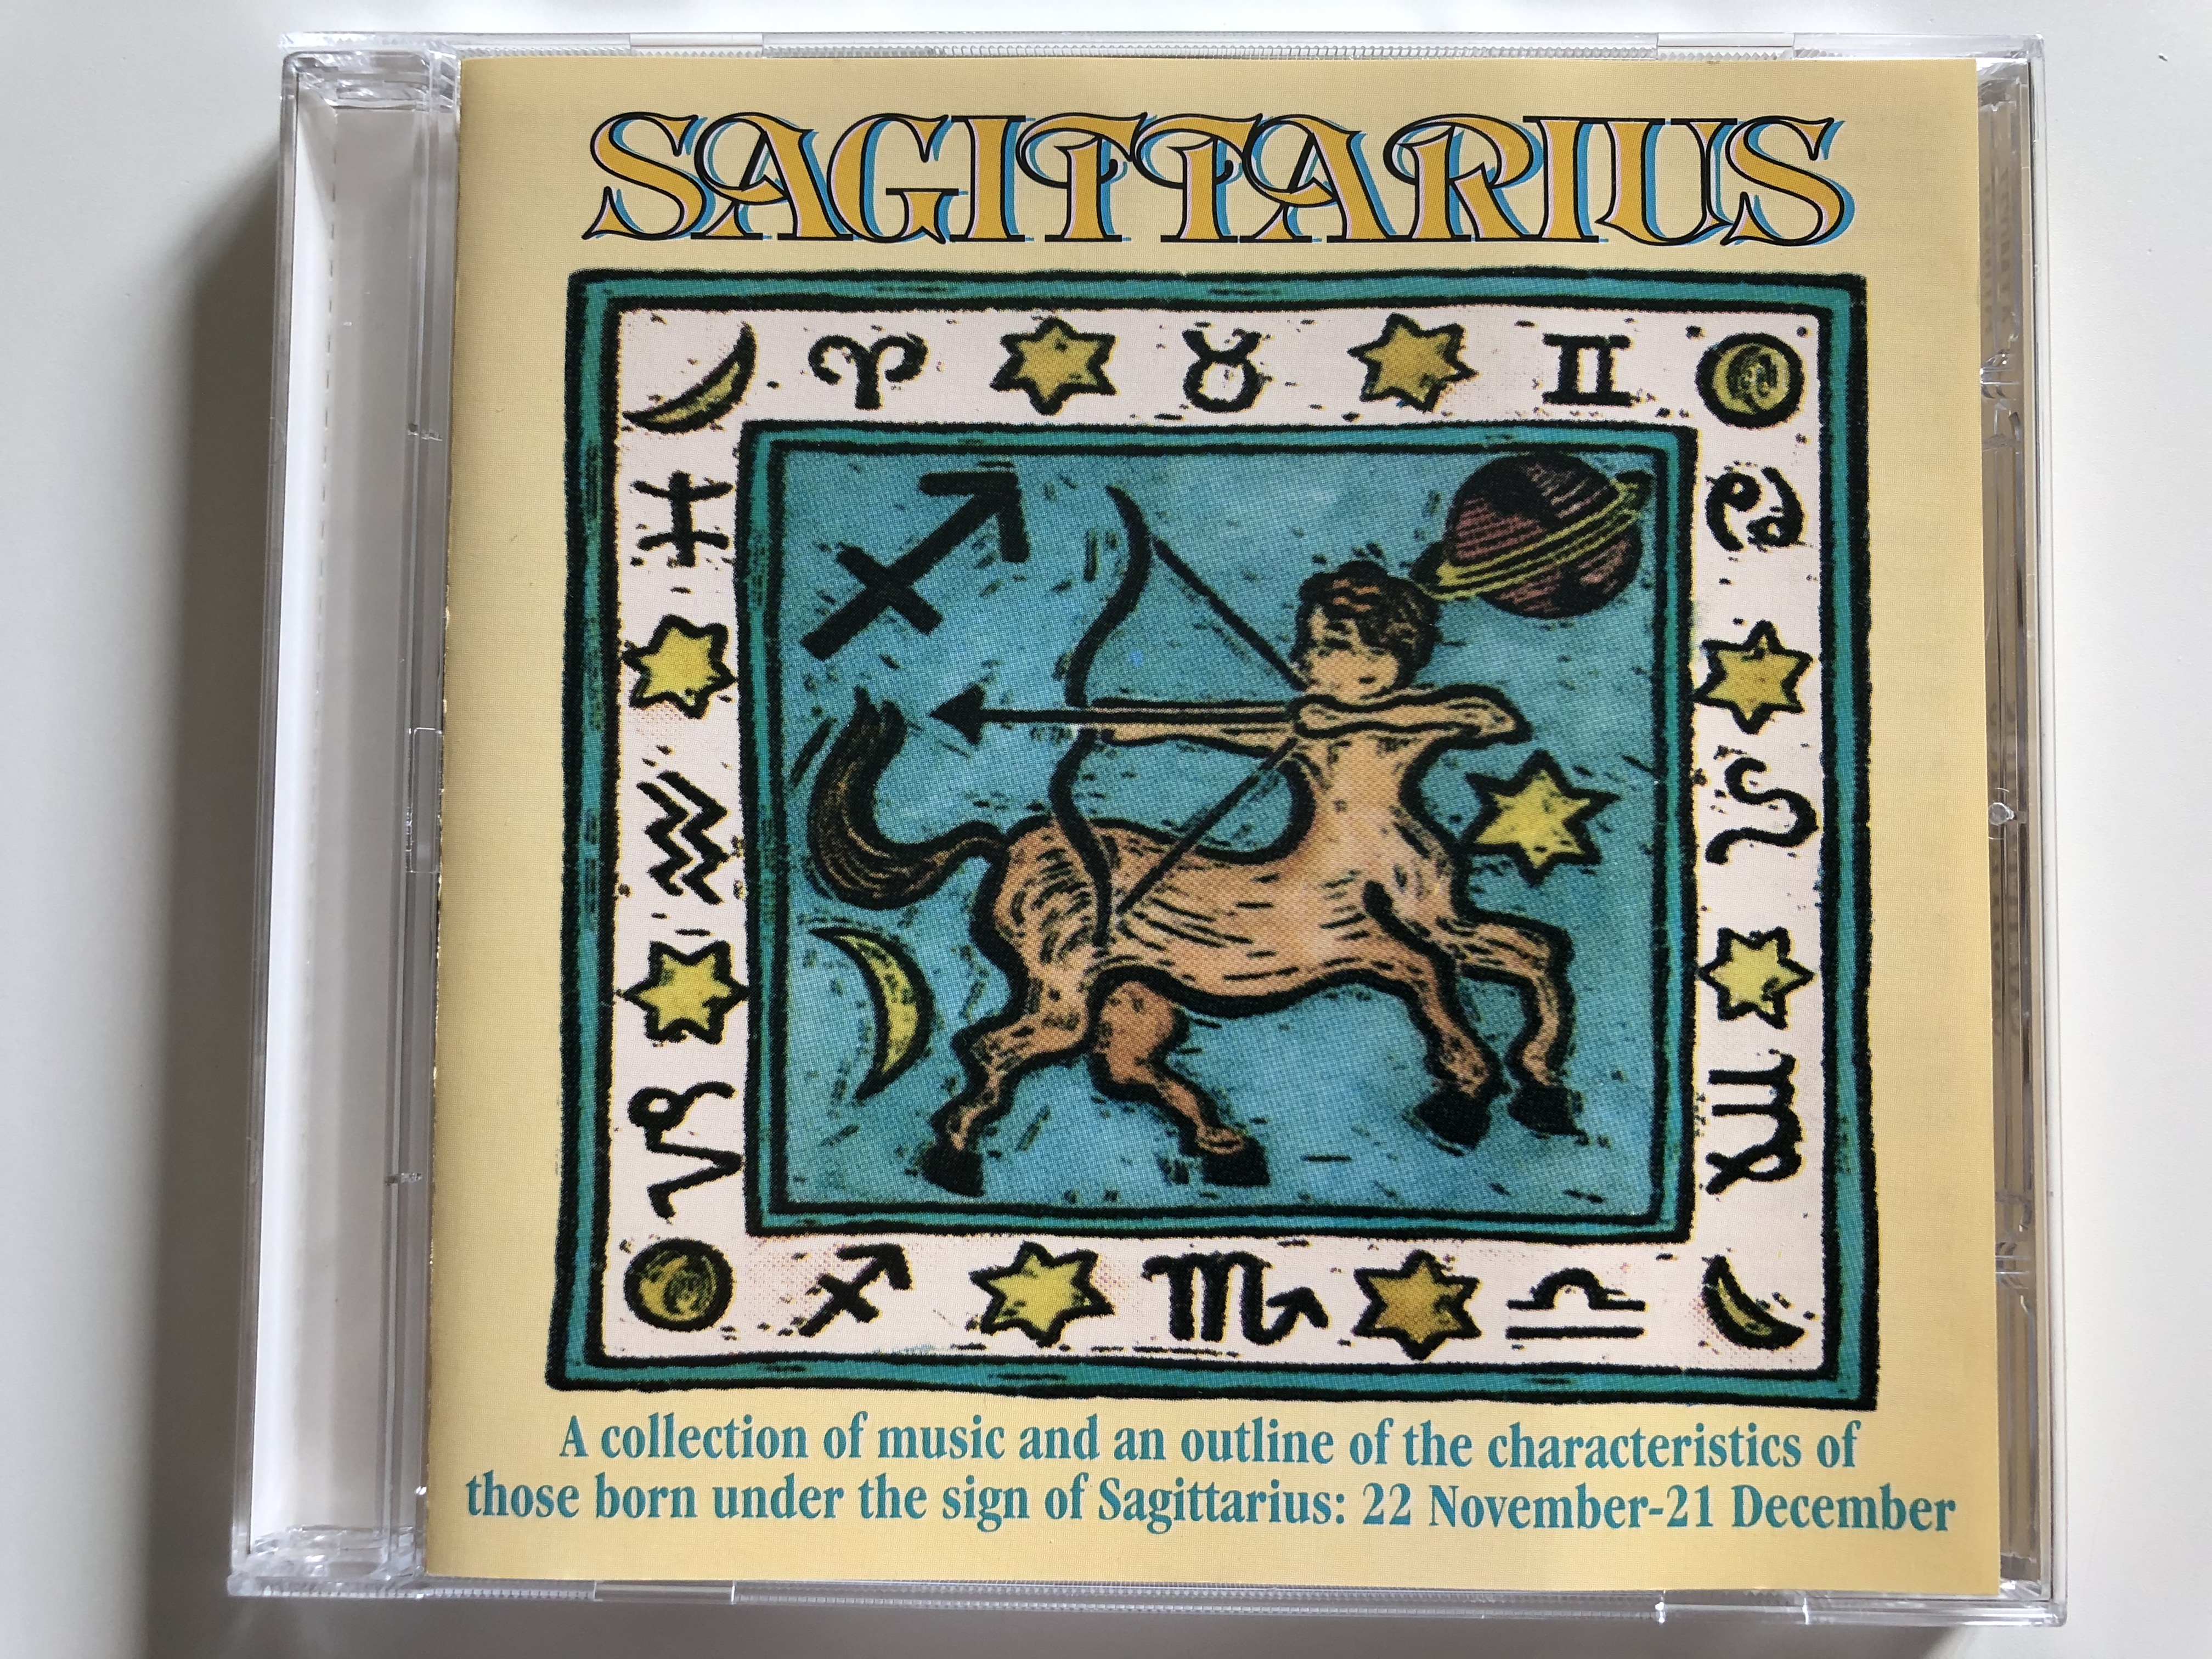 sagittarius-a-collection-of-music-and-an-outline-of-the-characteristics-of-those-born-under-the-sign-of-sagittarius-22-november-21-december-tring-international-plc-audio-cd-atm027-atm027-1-.jpg